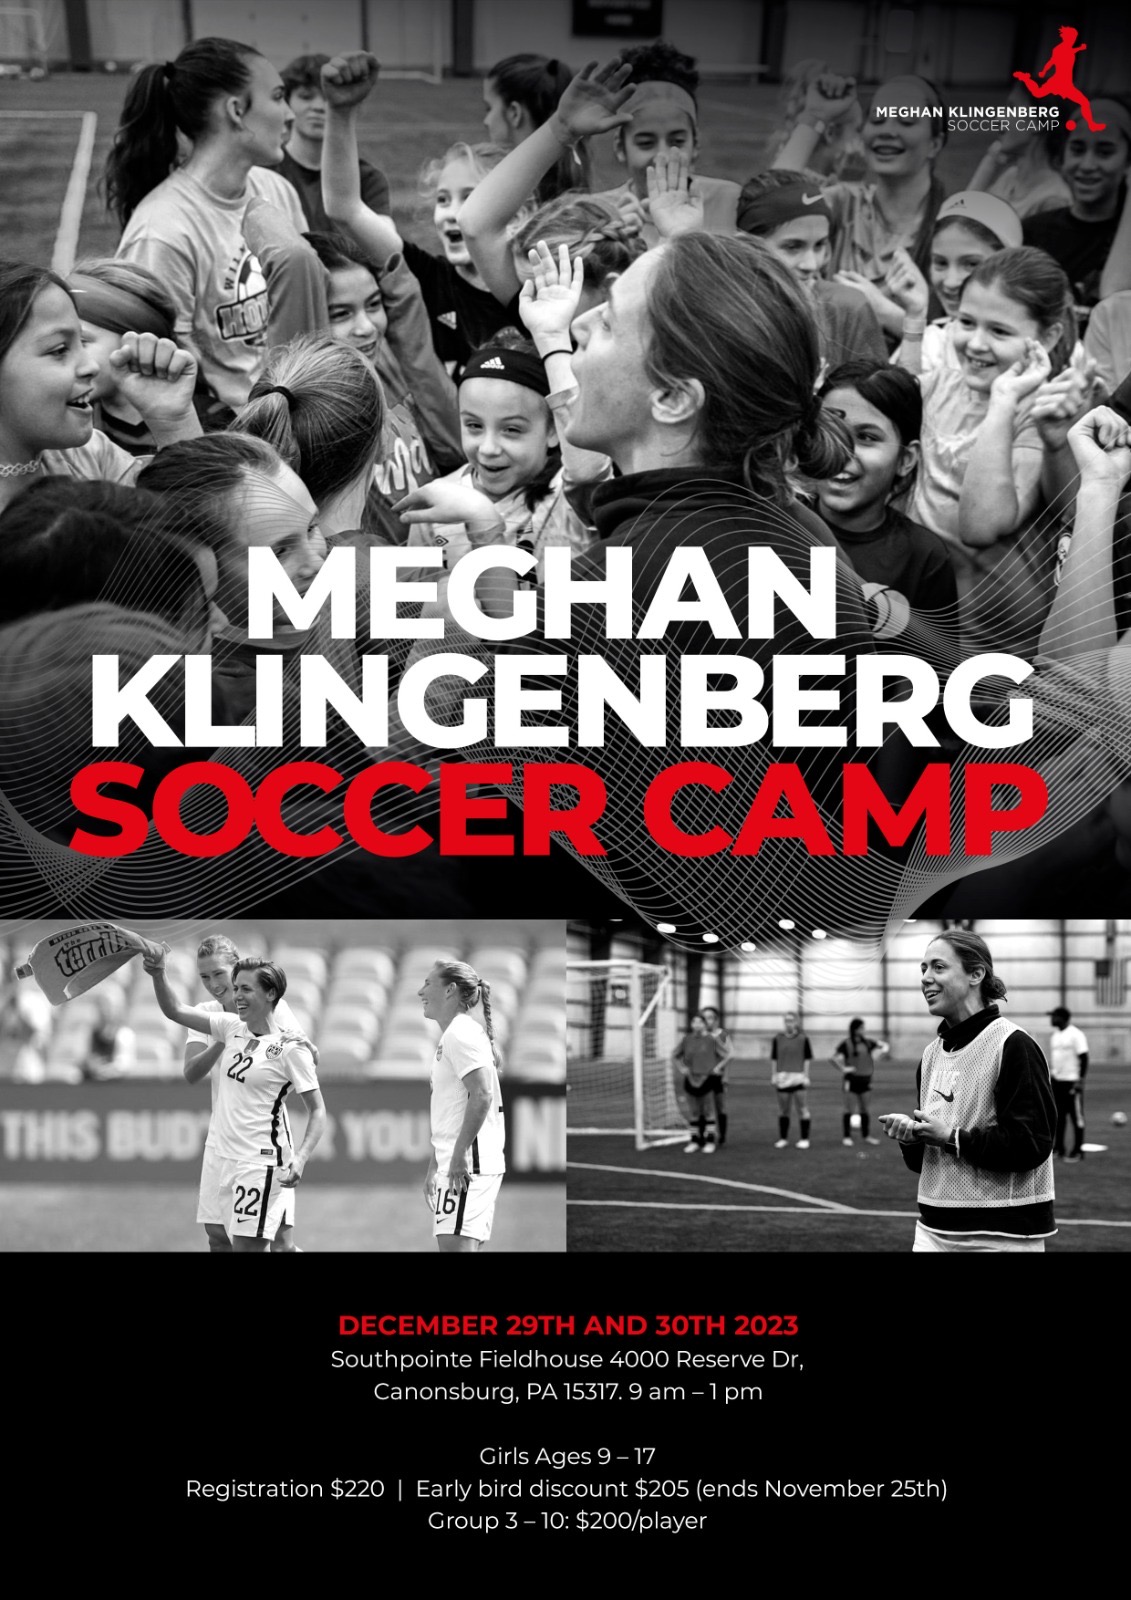 Date: December 29th &amp; 30th, 2023
Ages: 9-17yrs
Time: 9 am - 1pm
Cost: $220 
Location: Southpointe Fieldhouse 4000 Reserve Dr. Cannonsburg, PA 15317